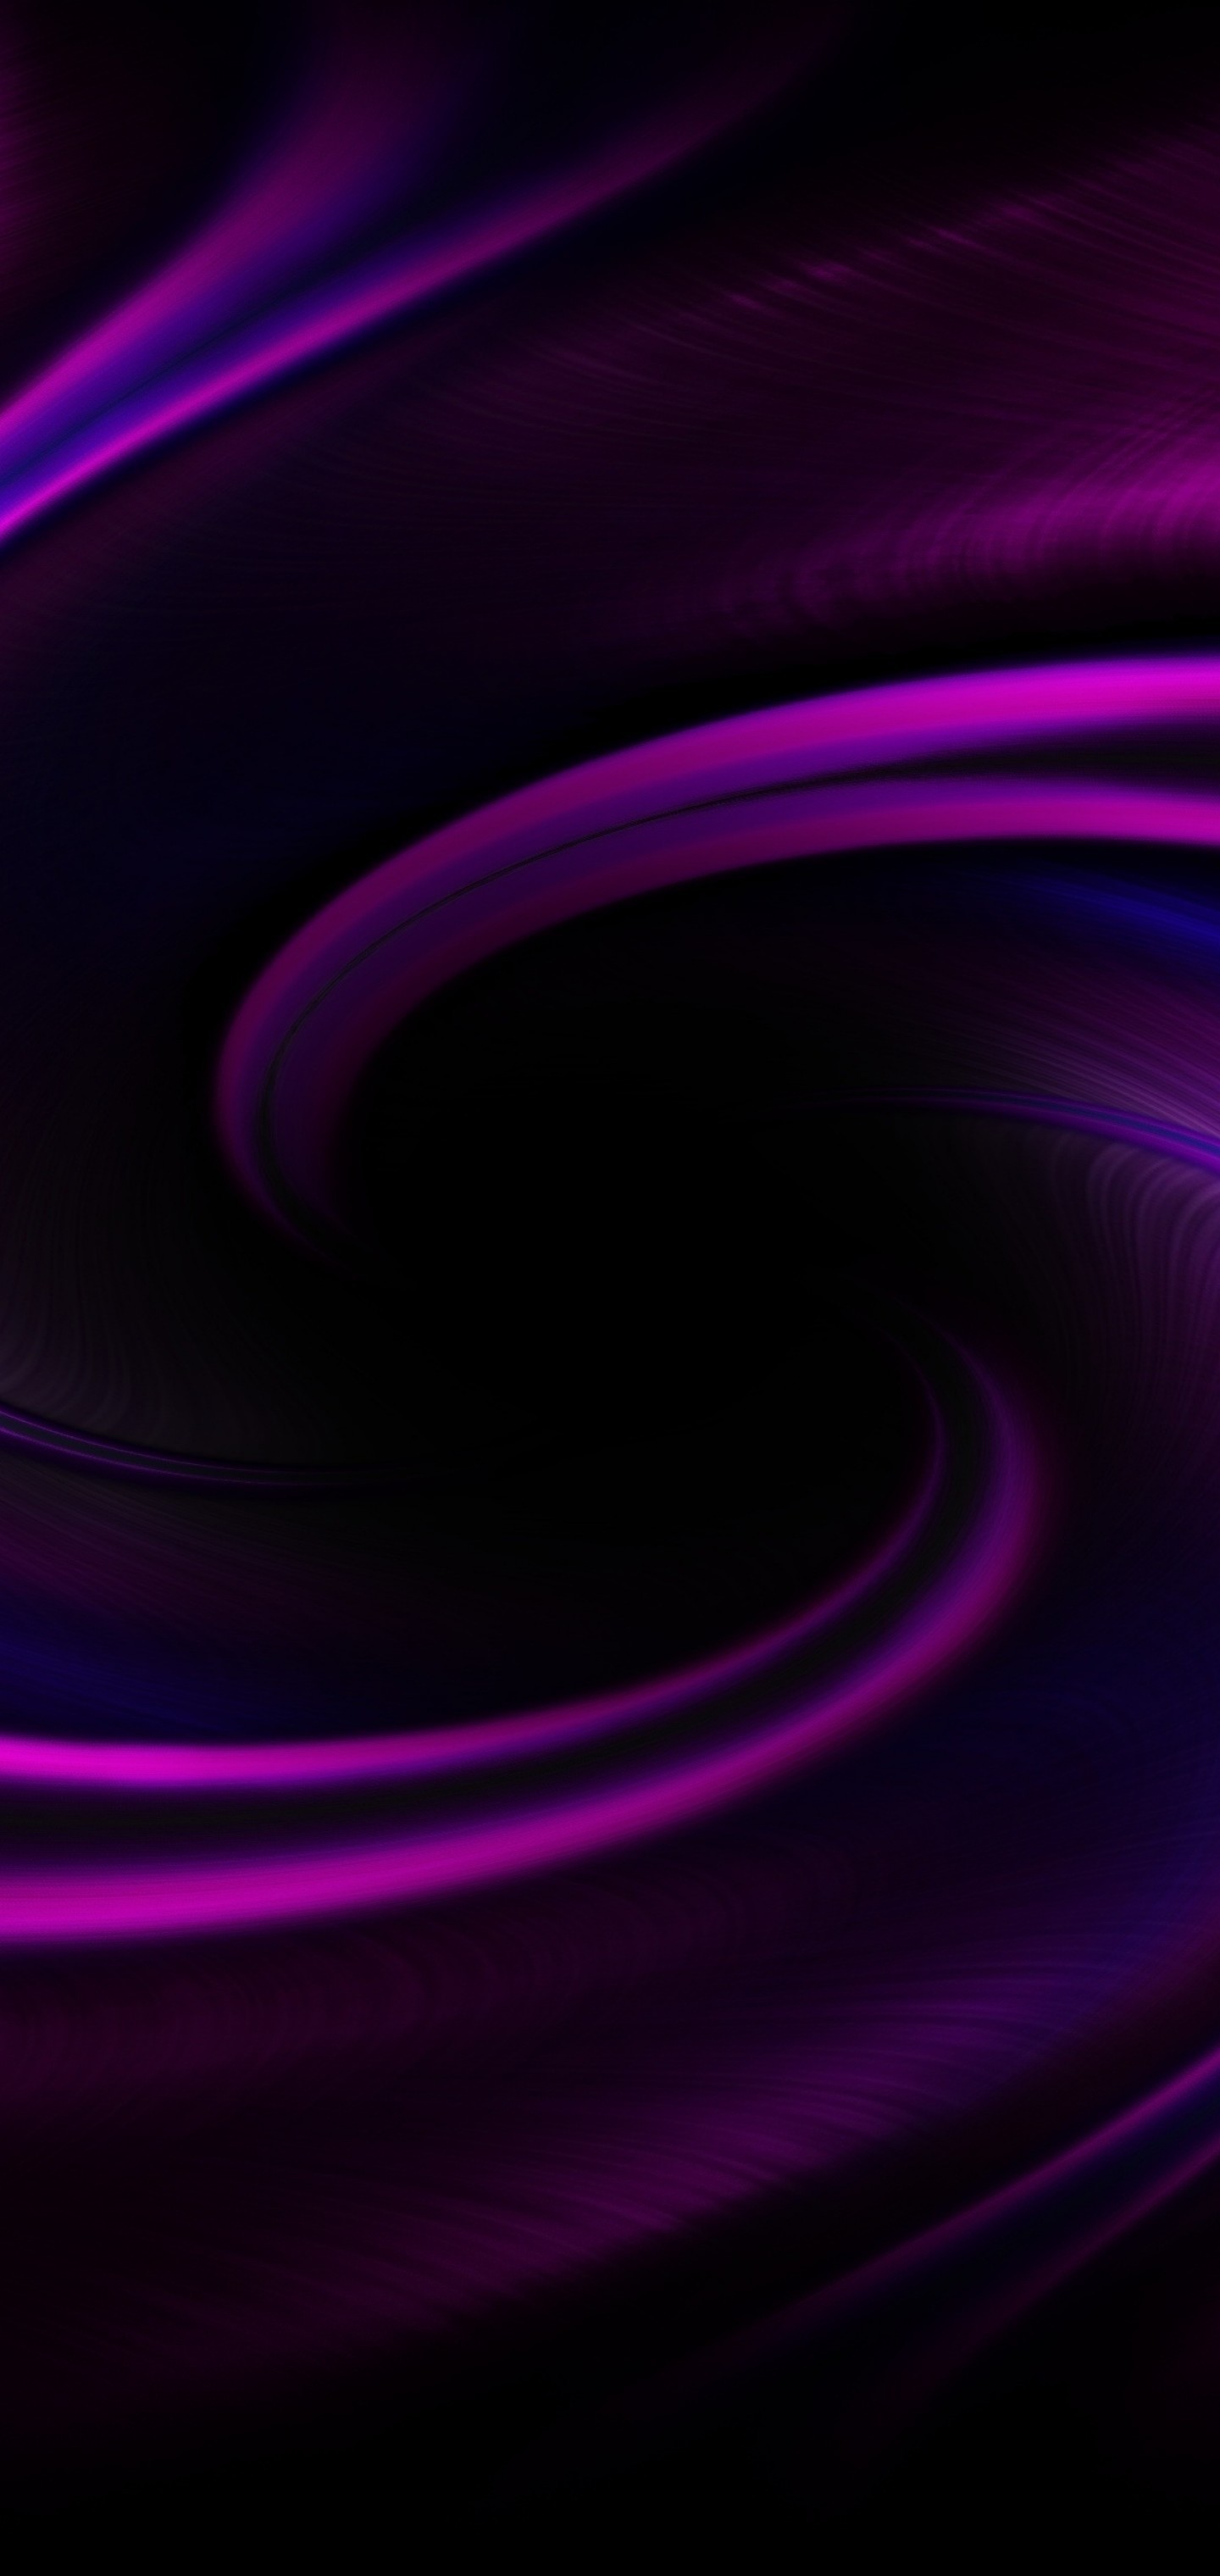 Violet, Merger, Blue, Gradient, Rotating, Lines, Waves - Abstract Background Iphone X , HD Wallpaper & Backgrounds